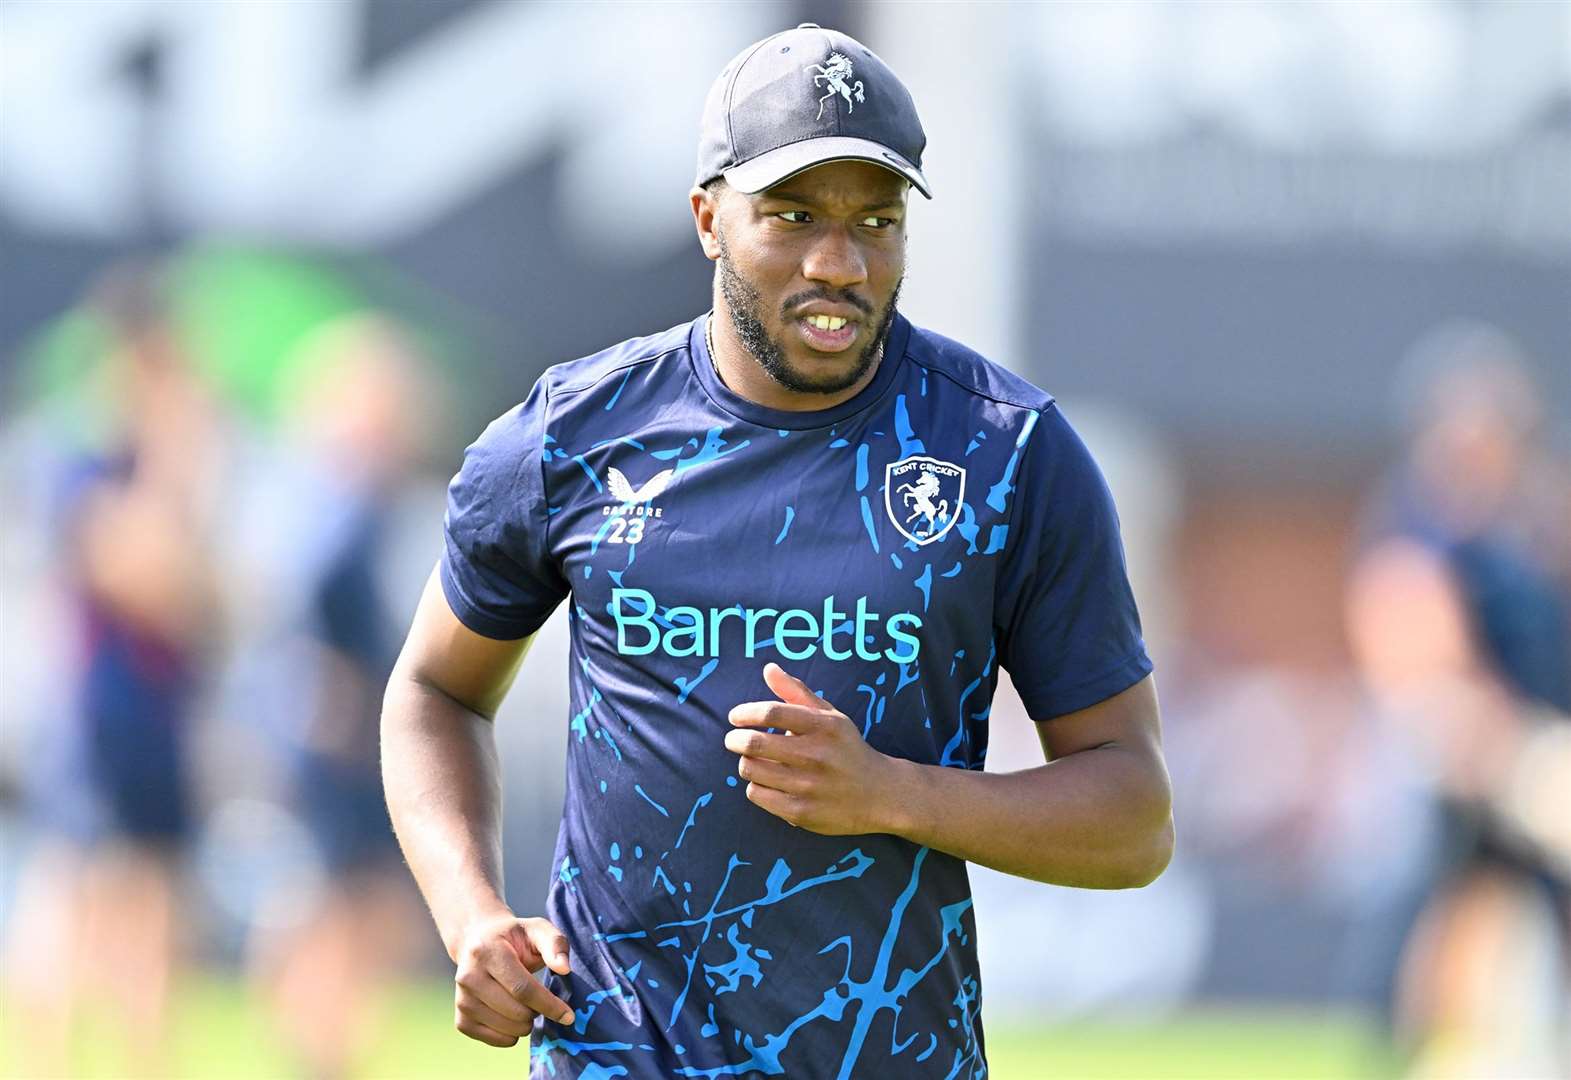 Daniel Bell-Drummond, who extended his Kent contract this year, also has been working hard at his bowling in recent years. Picture: Keith Gillard